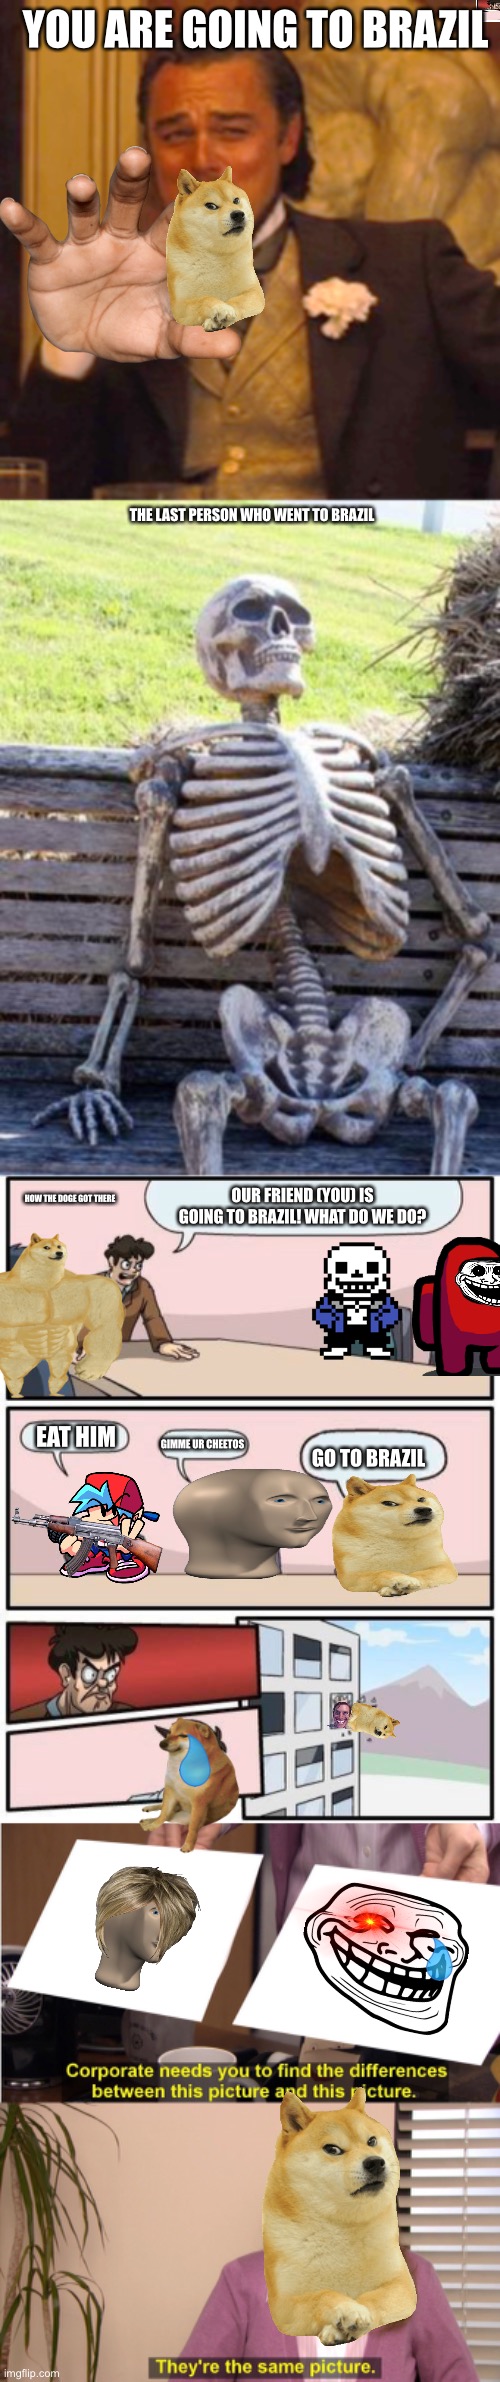 A meme stream | YOU ARE GOING TO BRAZIL; THE LAST PERSON WHO WENT TO BRAZIL; HOW THE DOGE GOT THERE; OUR FRIEND (YOU) IS GOING TO BRAZIL! WHAT DO WE DO? EAT HIM; GIMME UR CHEETOS; GO TO BRAZIL | image tagged in memes,laughing leo,waiting skeleton,boardroom meeting suggestion,they're the same picture | made w/ Imgflip meme maker